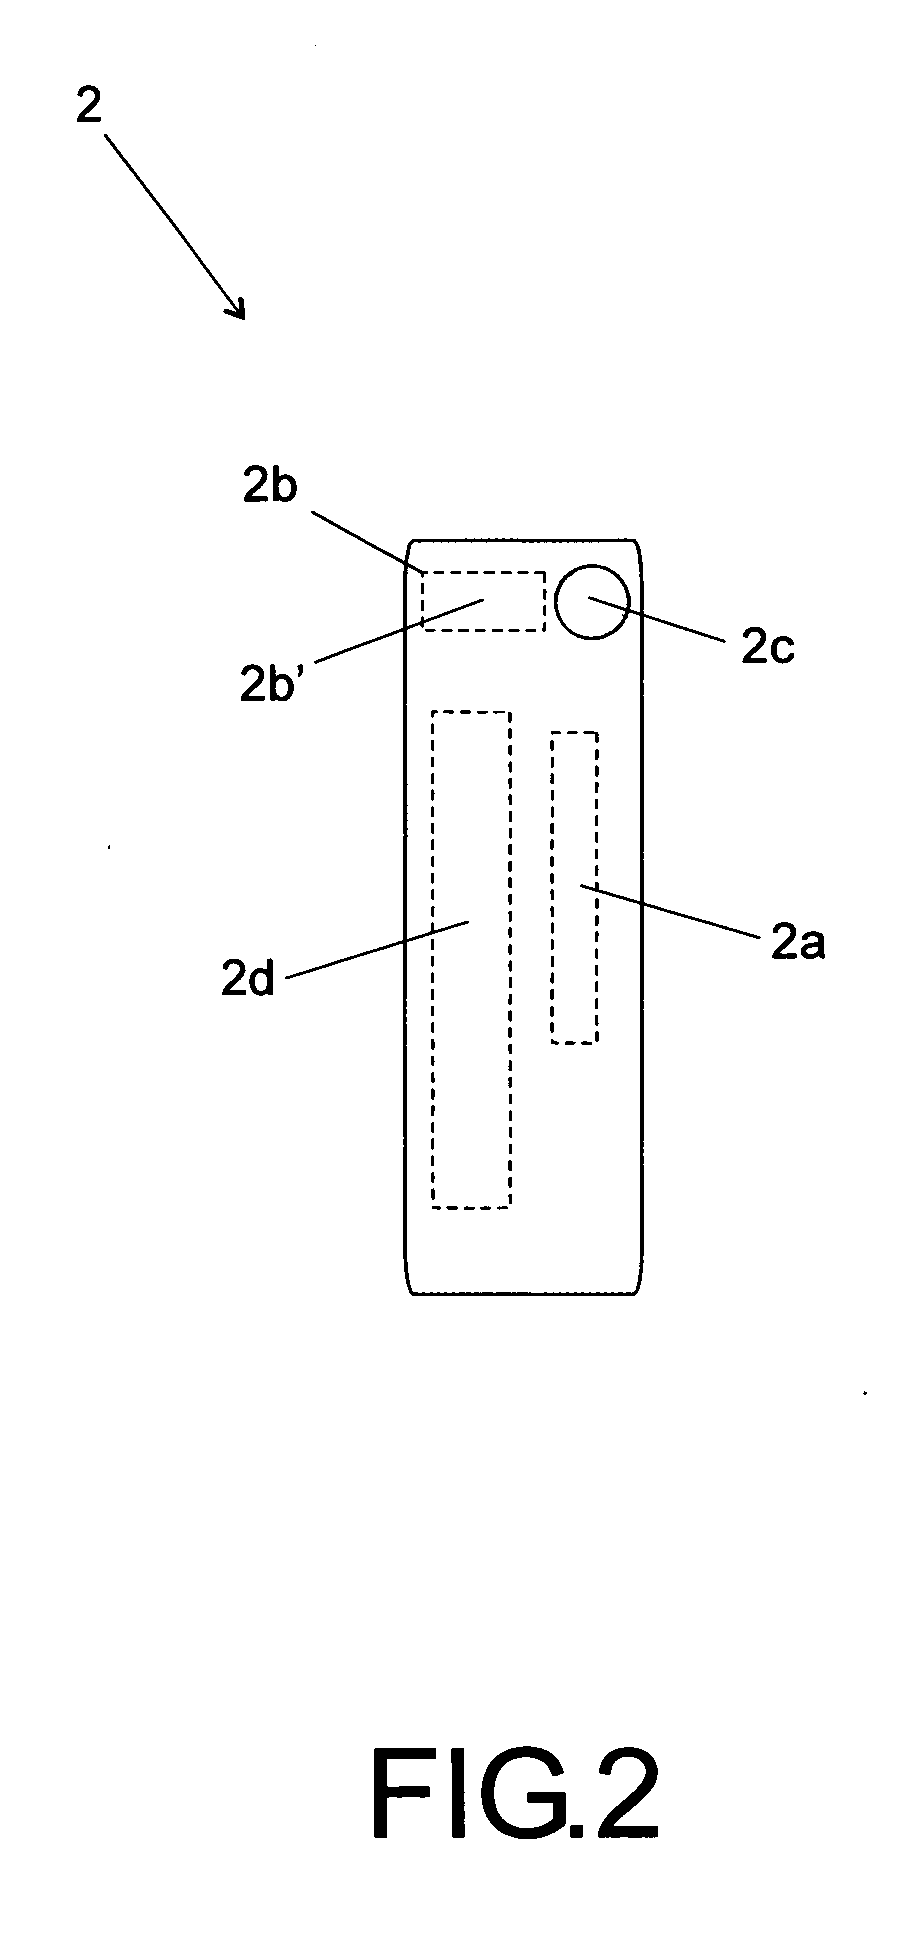 Method of standardization of injectalbe medicines and their diluents